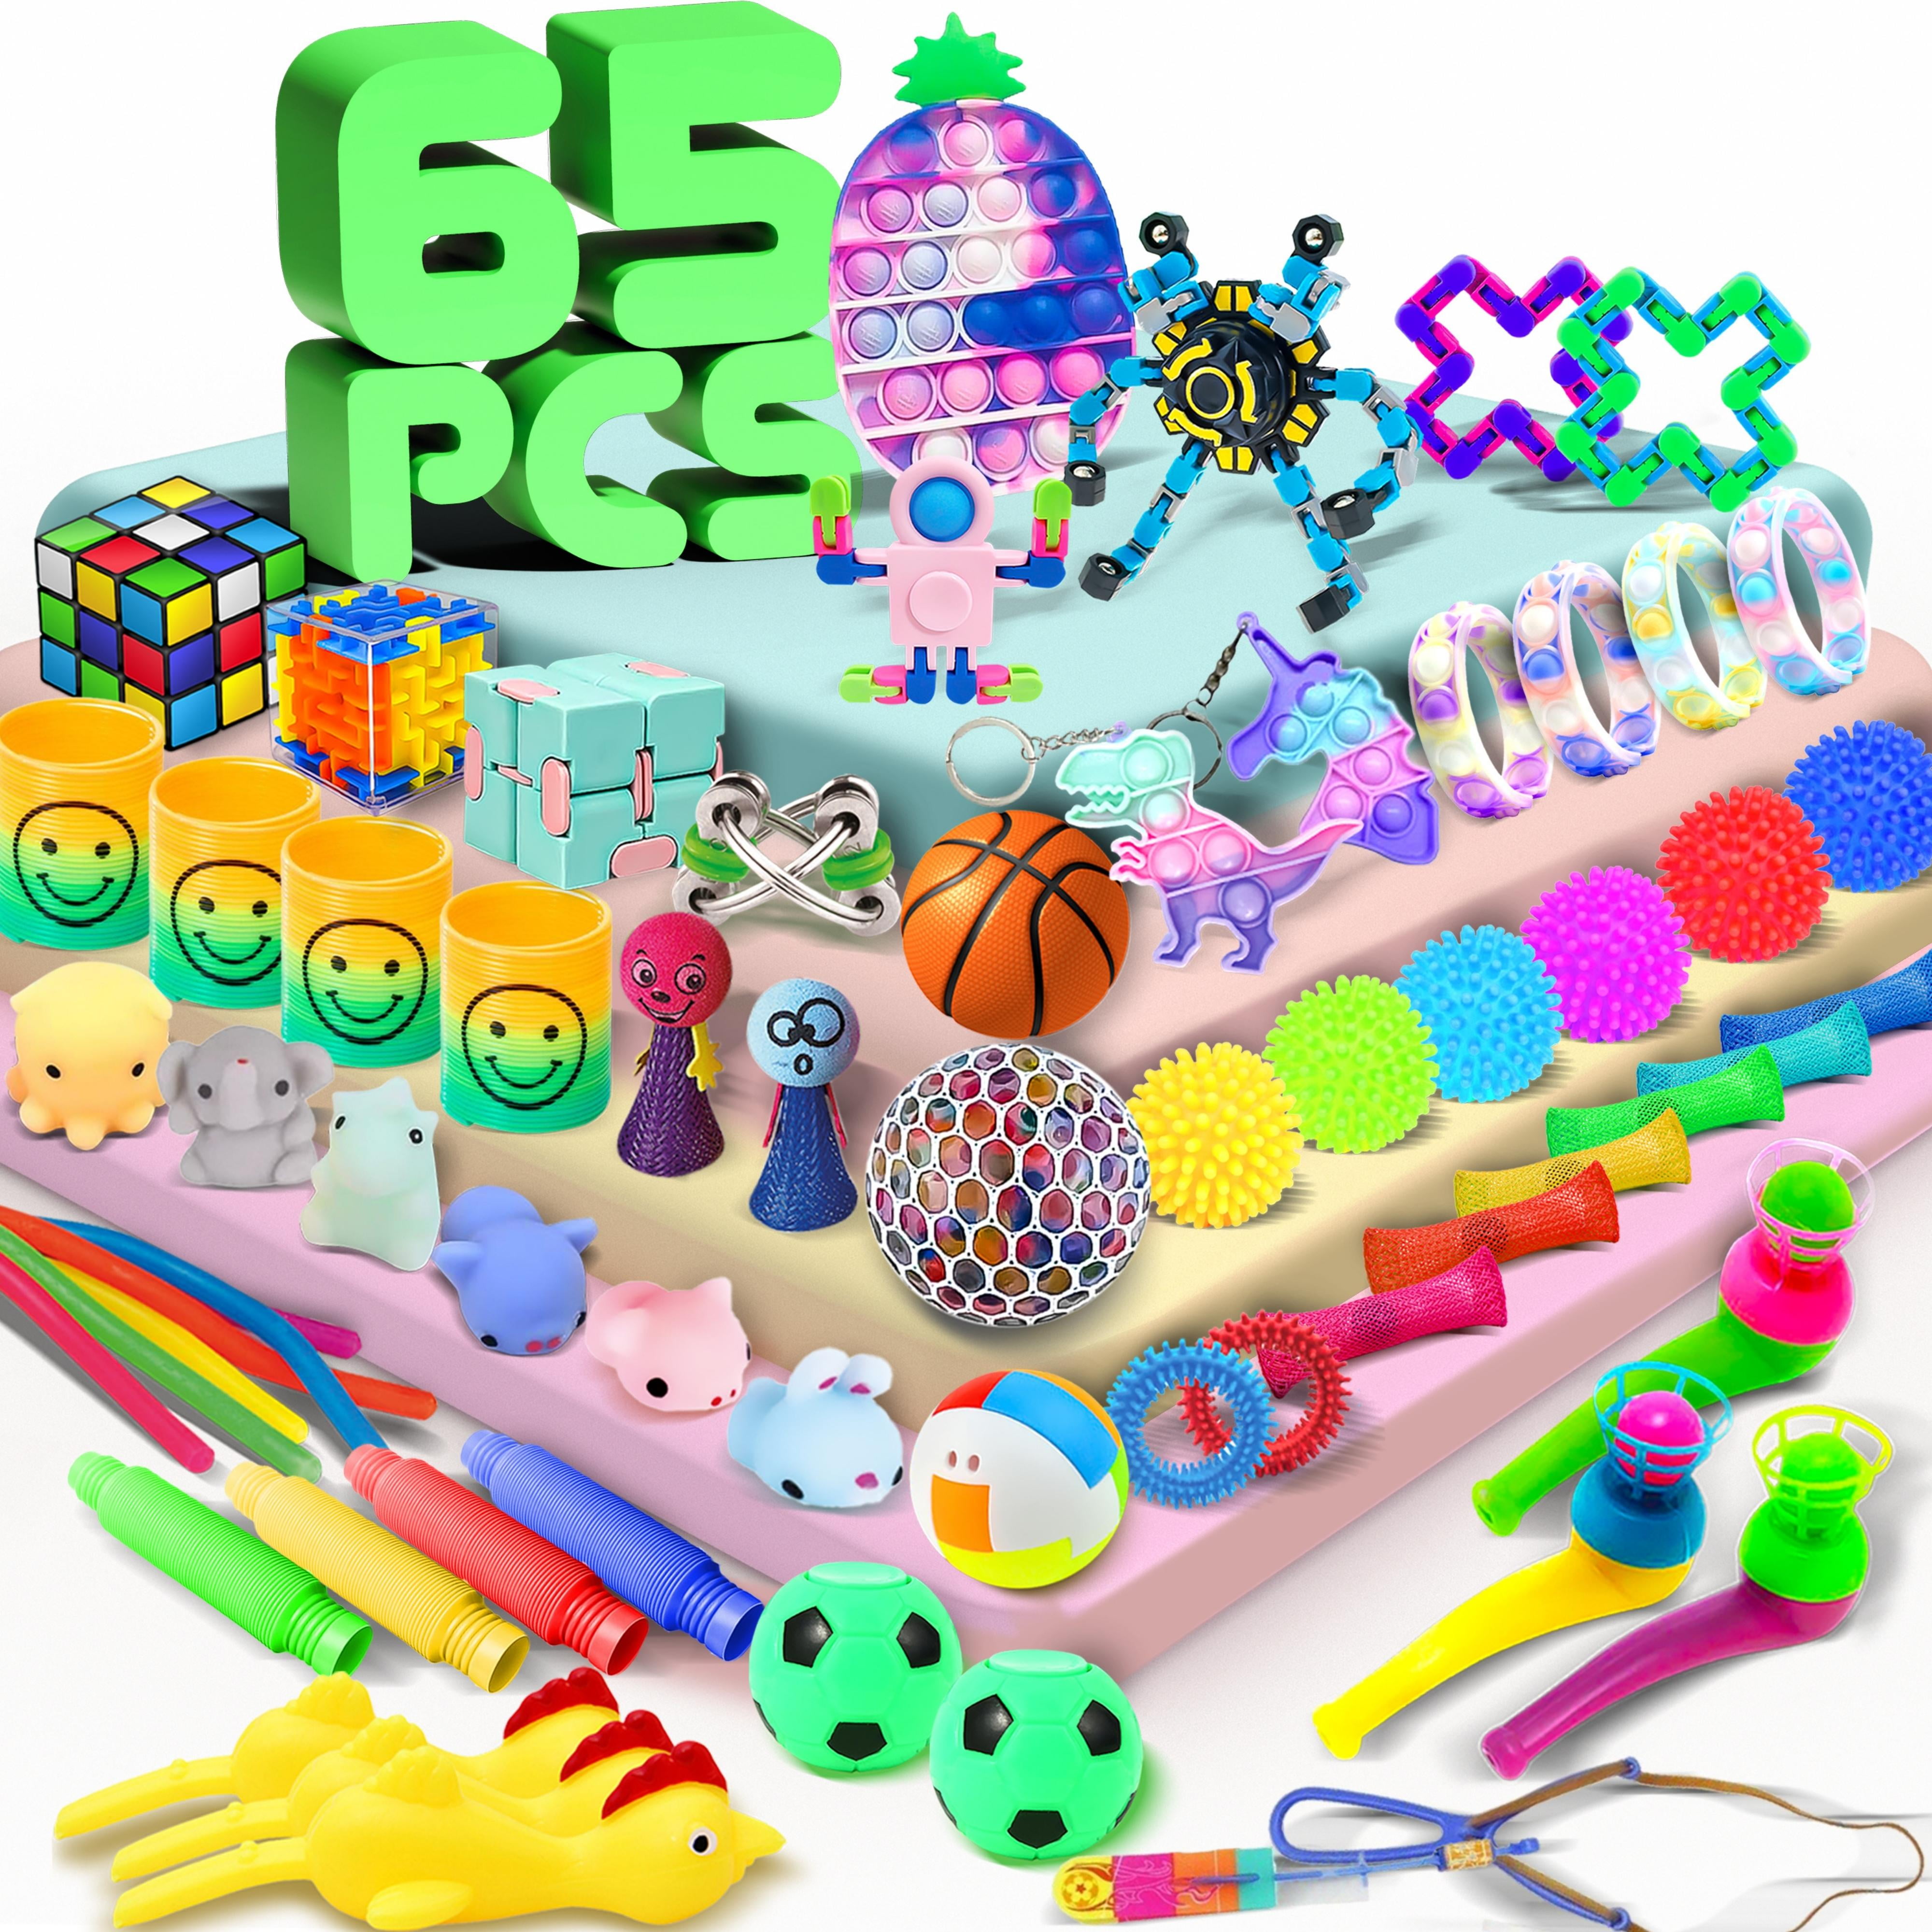 65 Pack Bundle Sensory Fidget Toys Set-Puzzle Games Including Rainbow  Spring, Magic Cube, Squishy Toys, Fidget Spinners, and More for Autistic  Kids